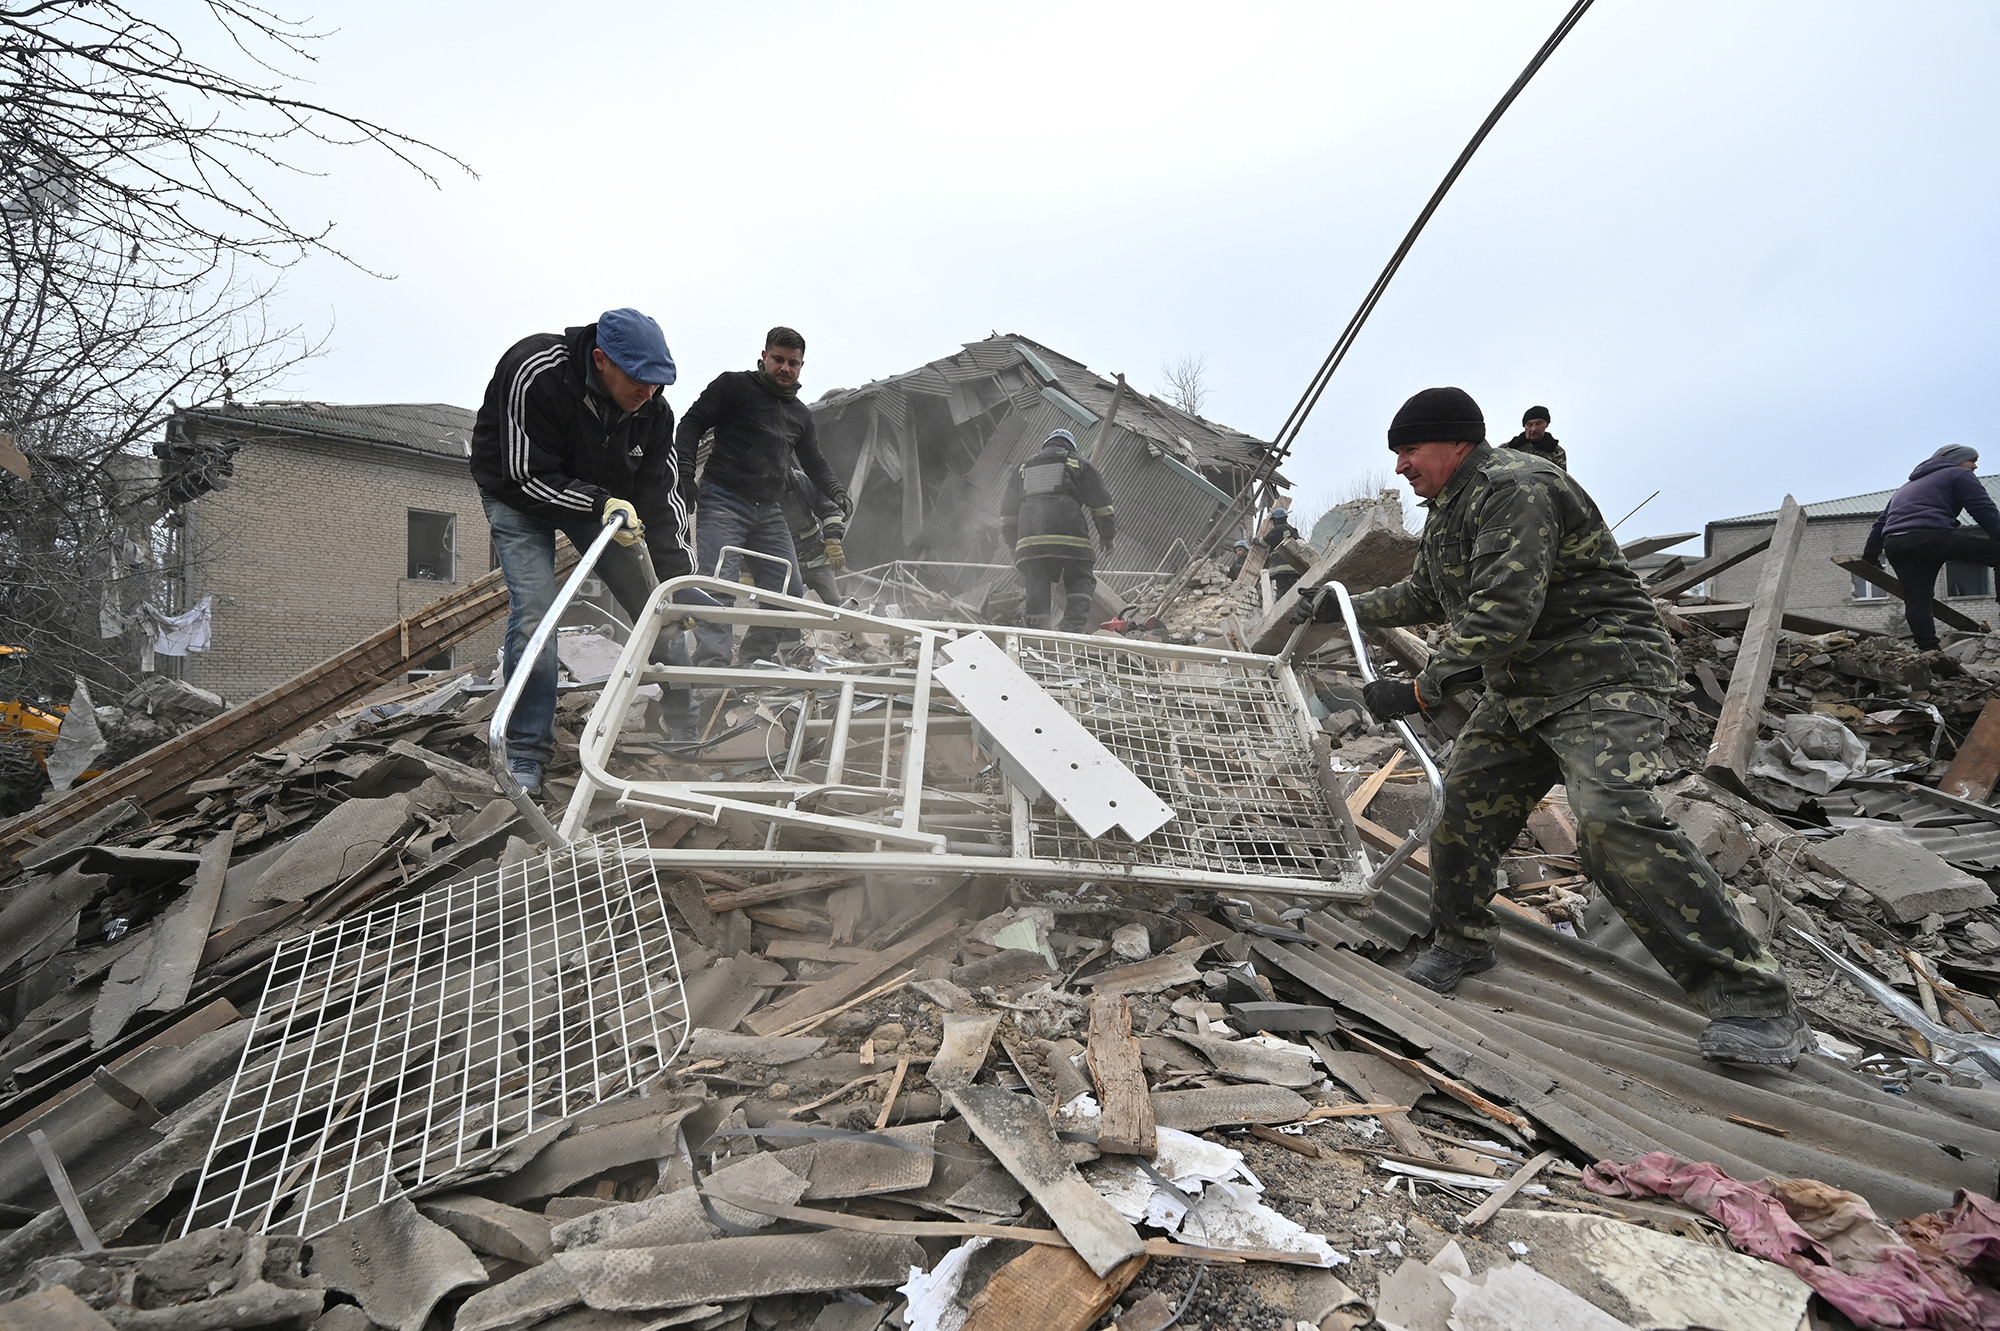 Rescuers work at the site of a maternity ward of a hospital destroyed by a Russian missile attack in Vilniansk, Zaporizhzhia region, Ukraine, on November 23.